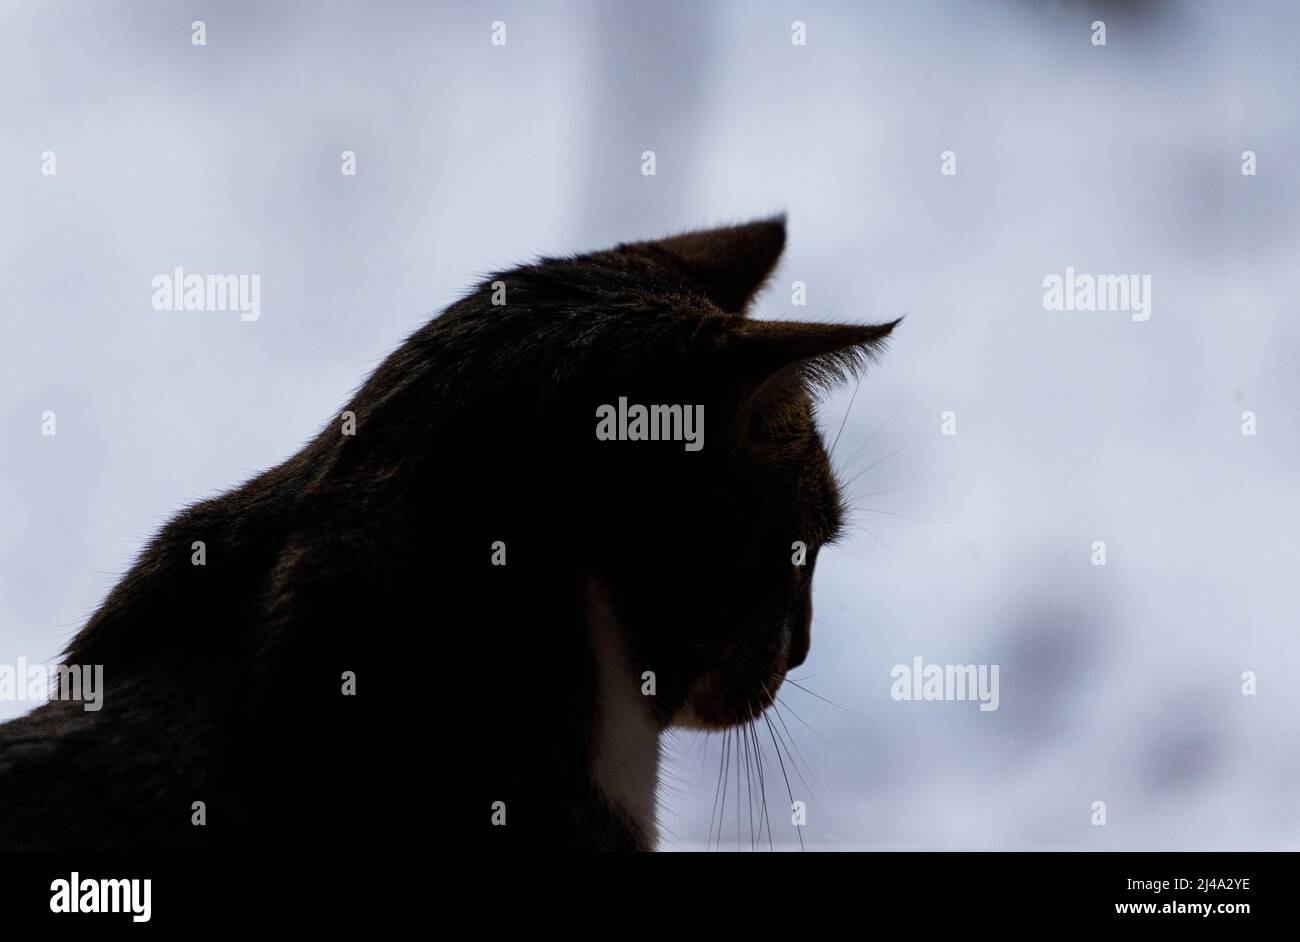 Cat silhouette from side with ears up looking forward Stock Photo